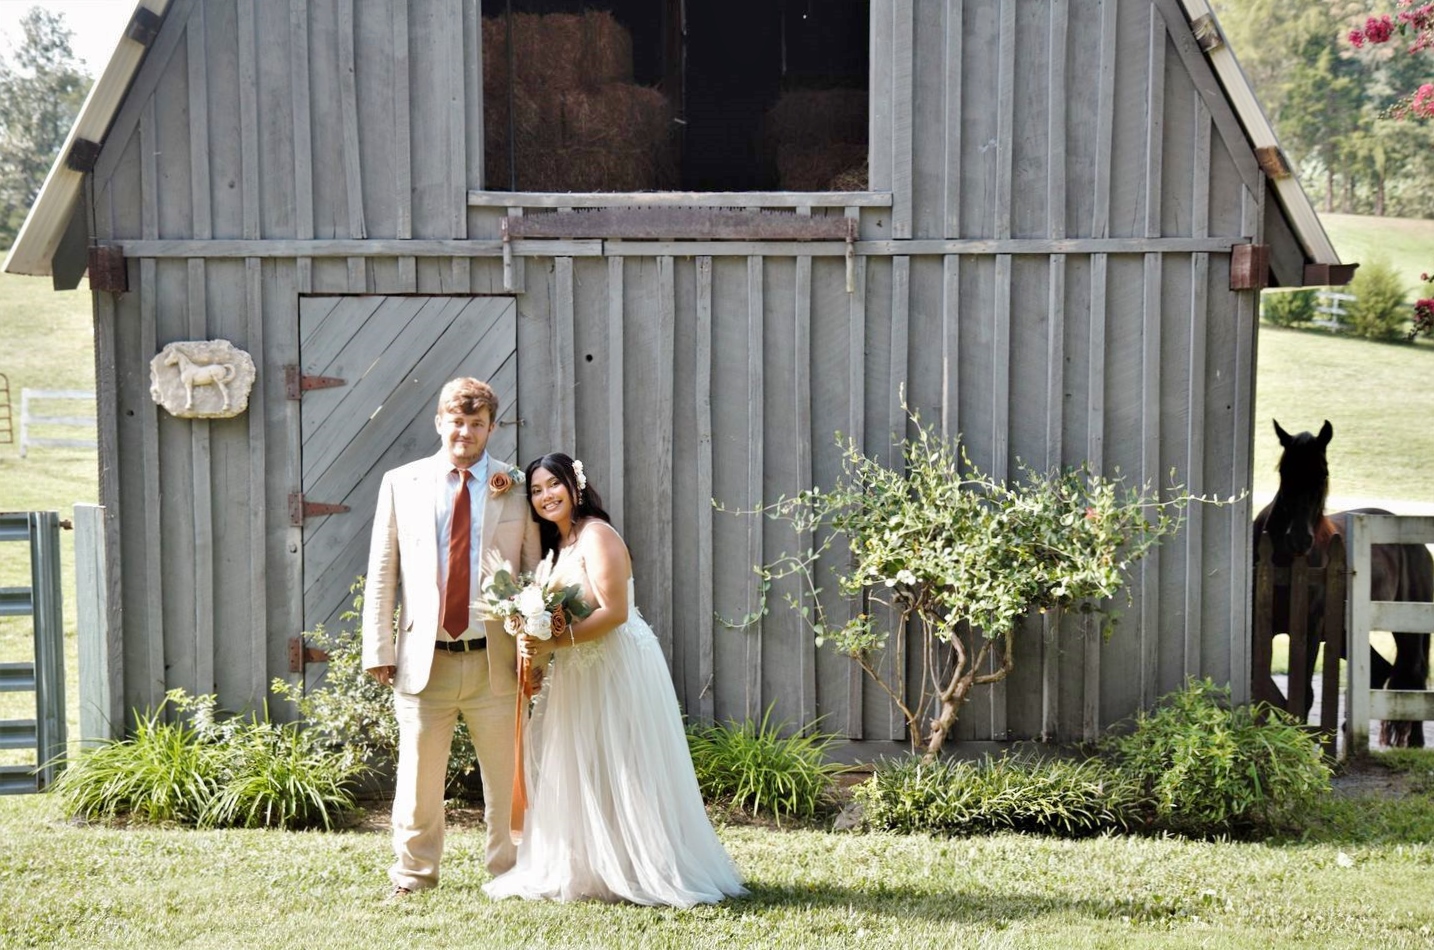 Bride and groom and black horse pose in front of the gray barn.